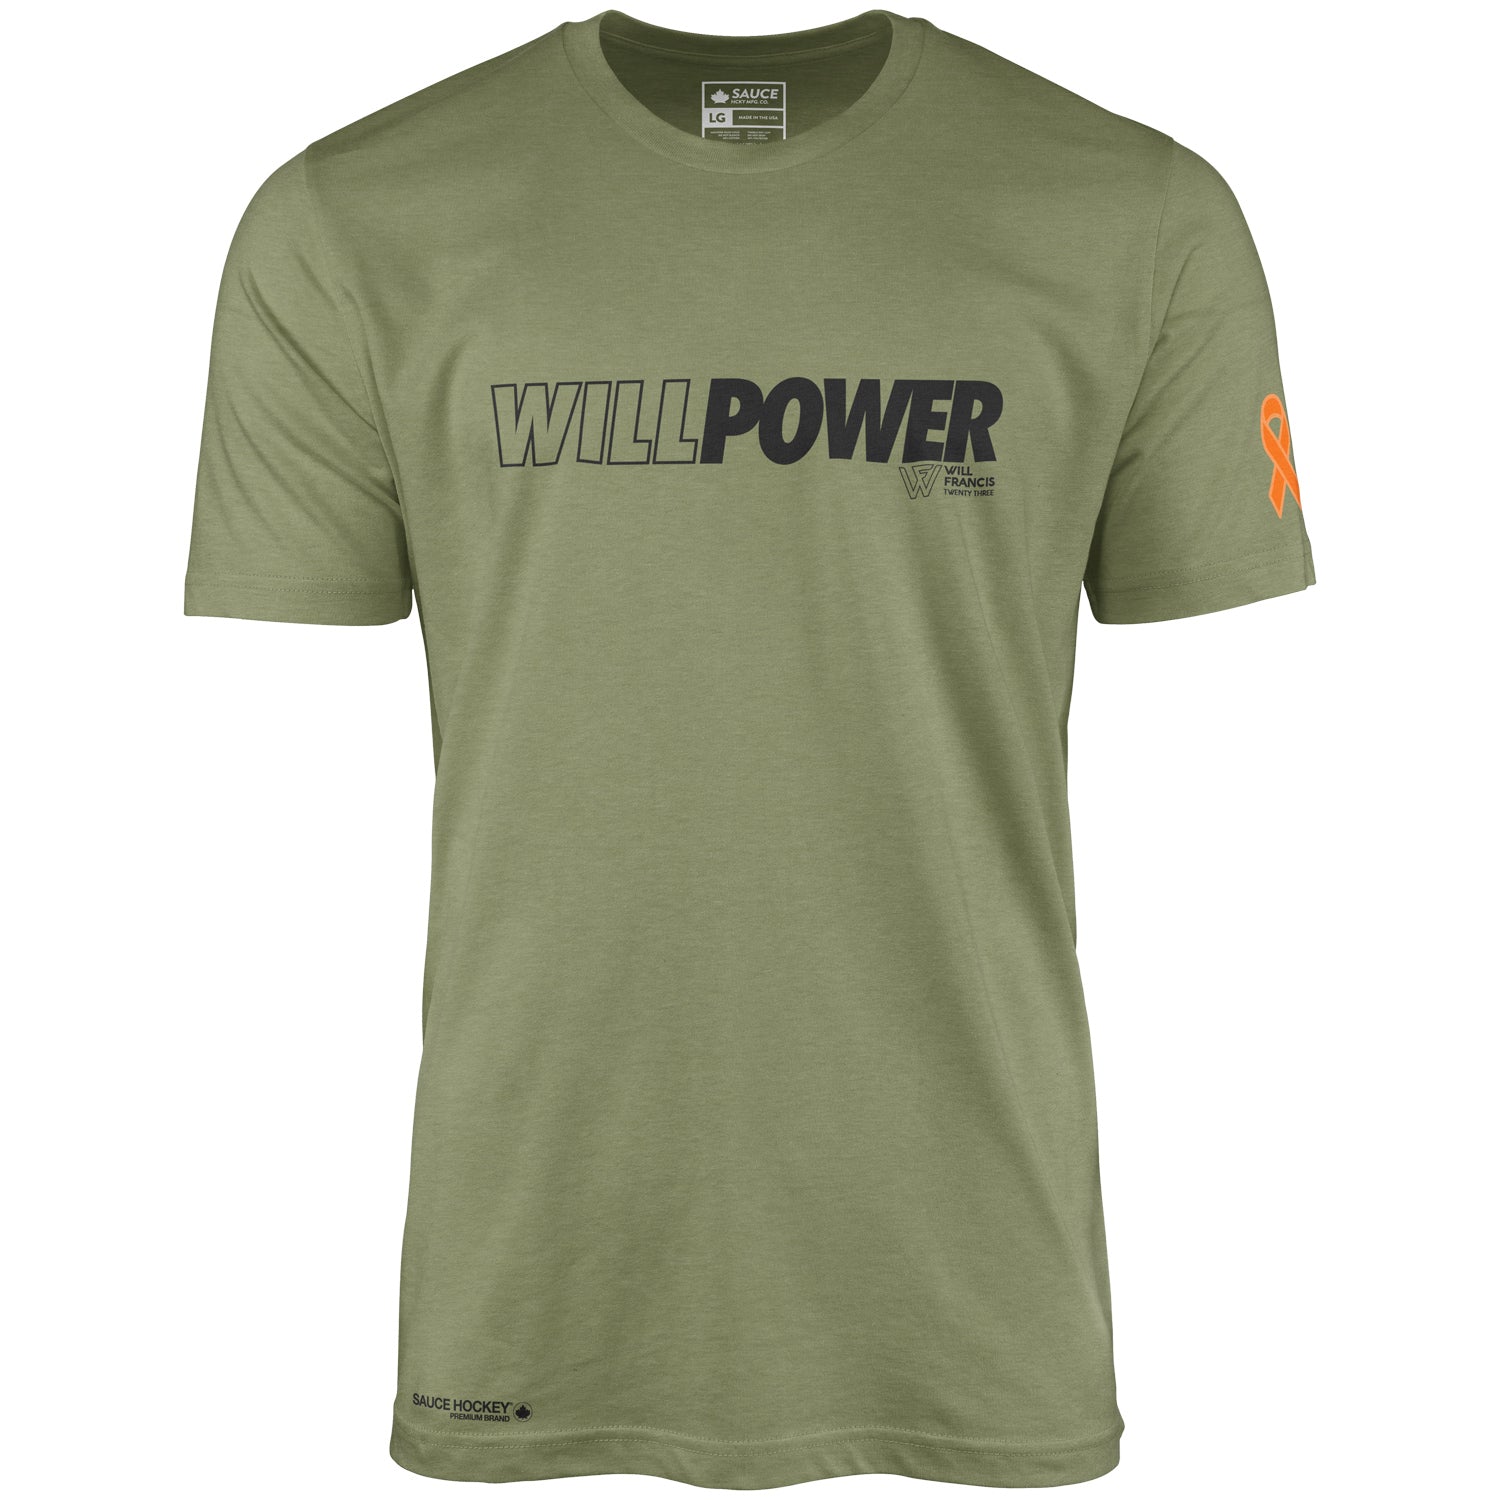 WILLPOWER - ARMY GREEN